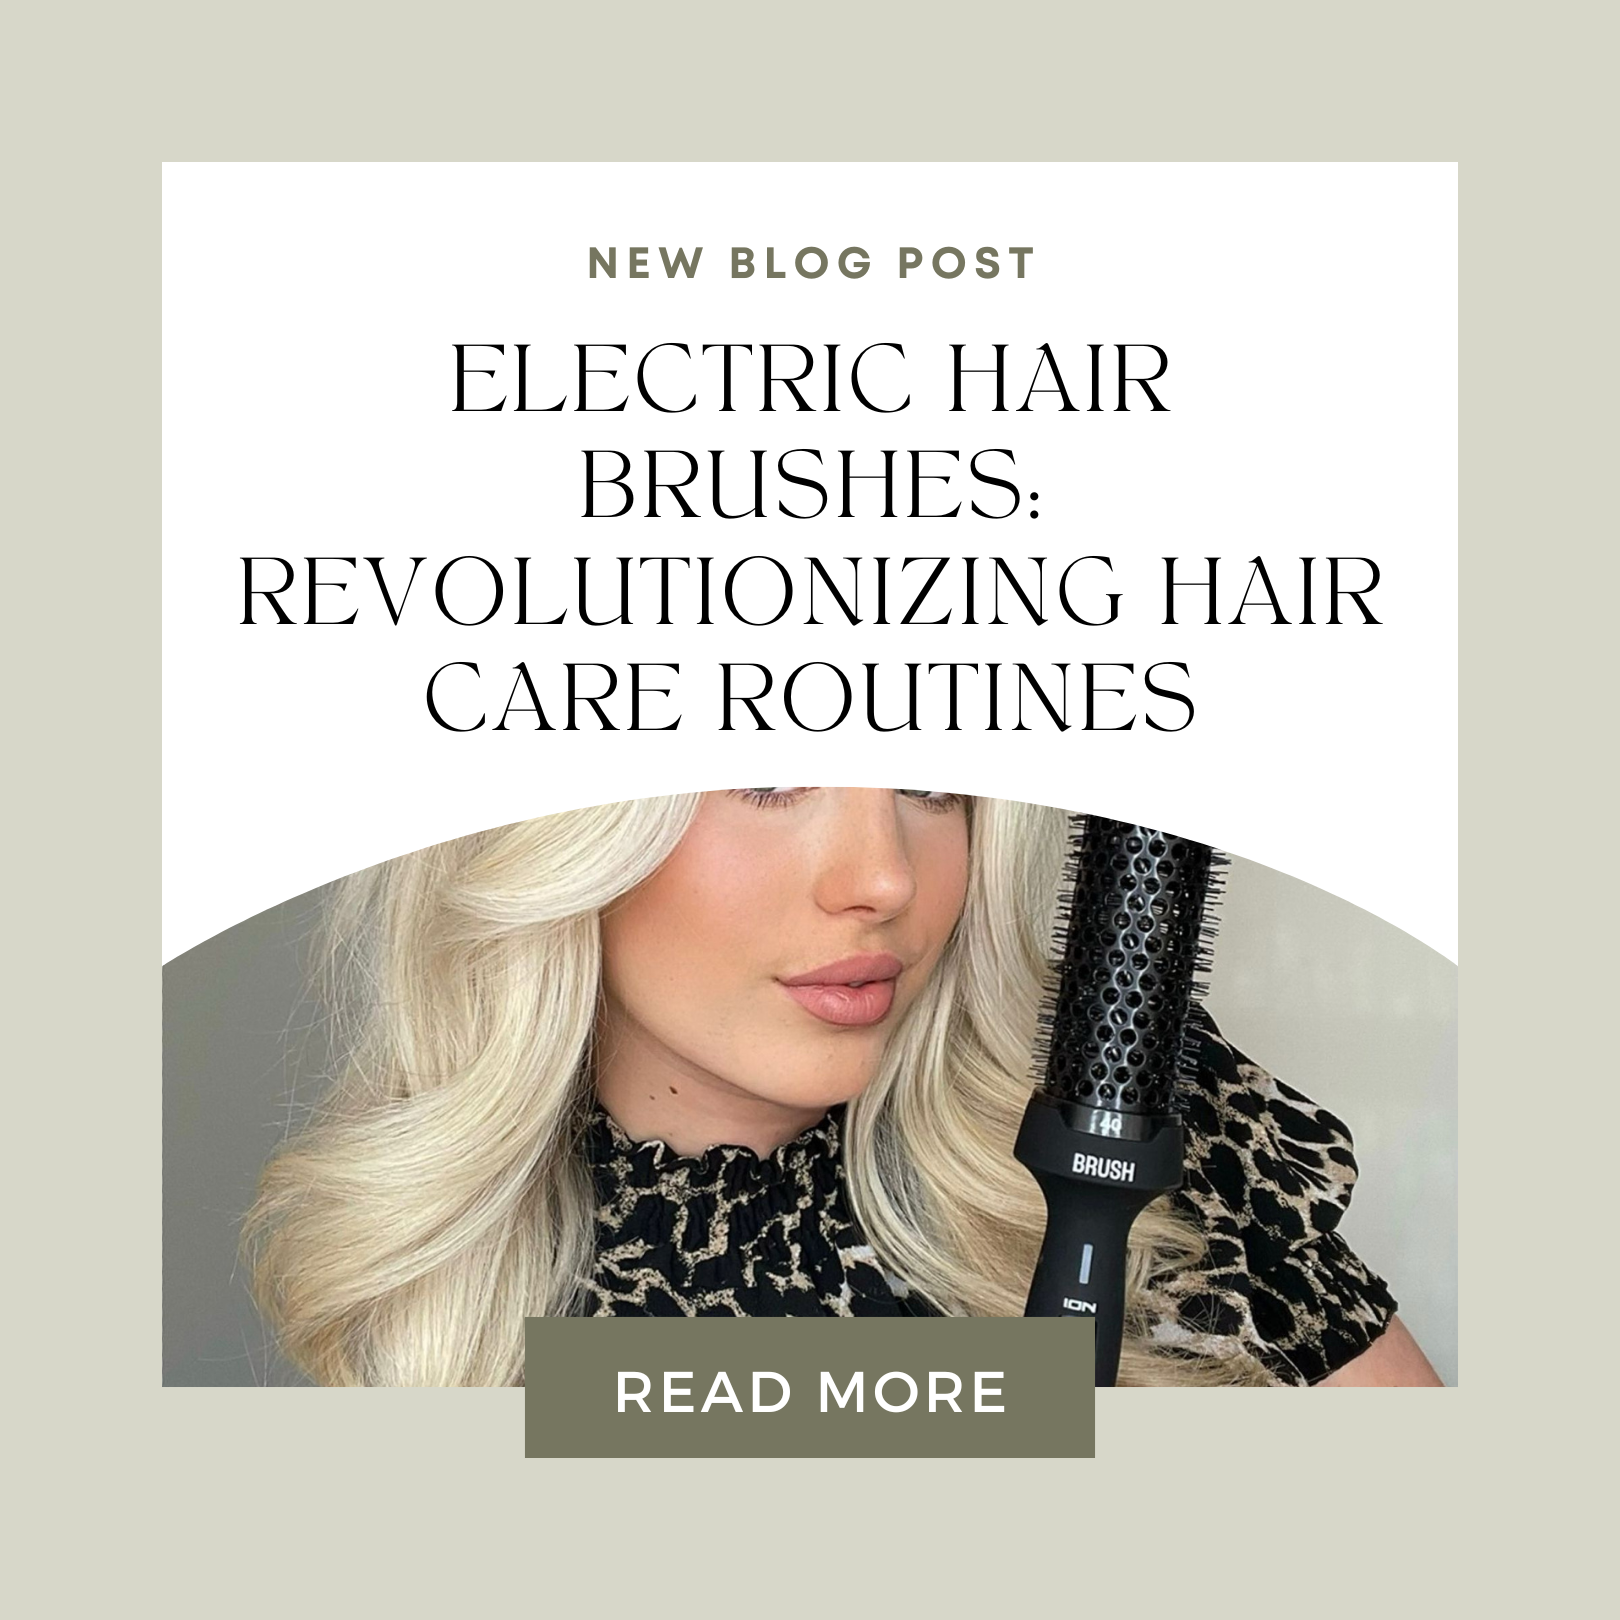 Electric Hair Brushes: Revolutionizing Hair Care Routines